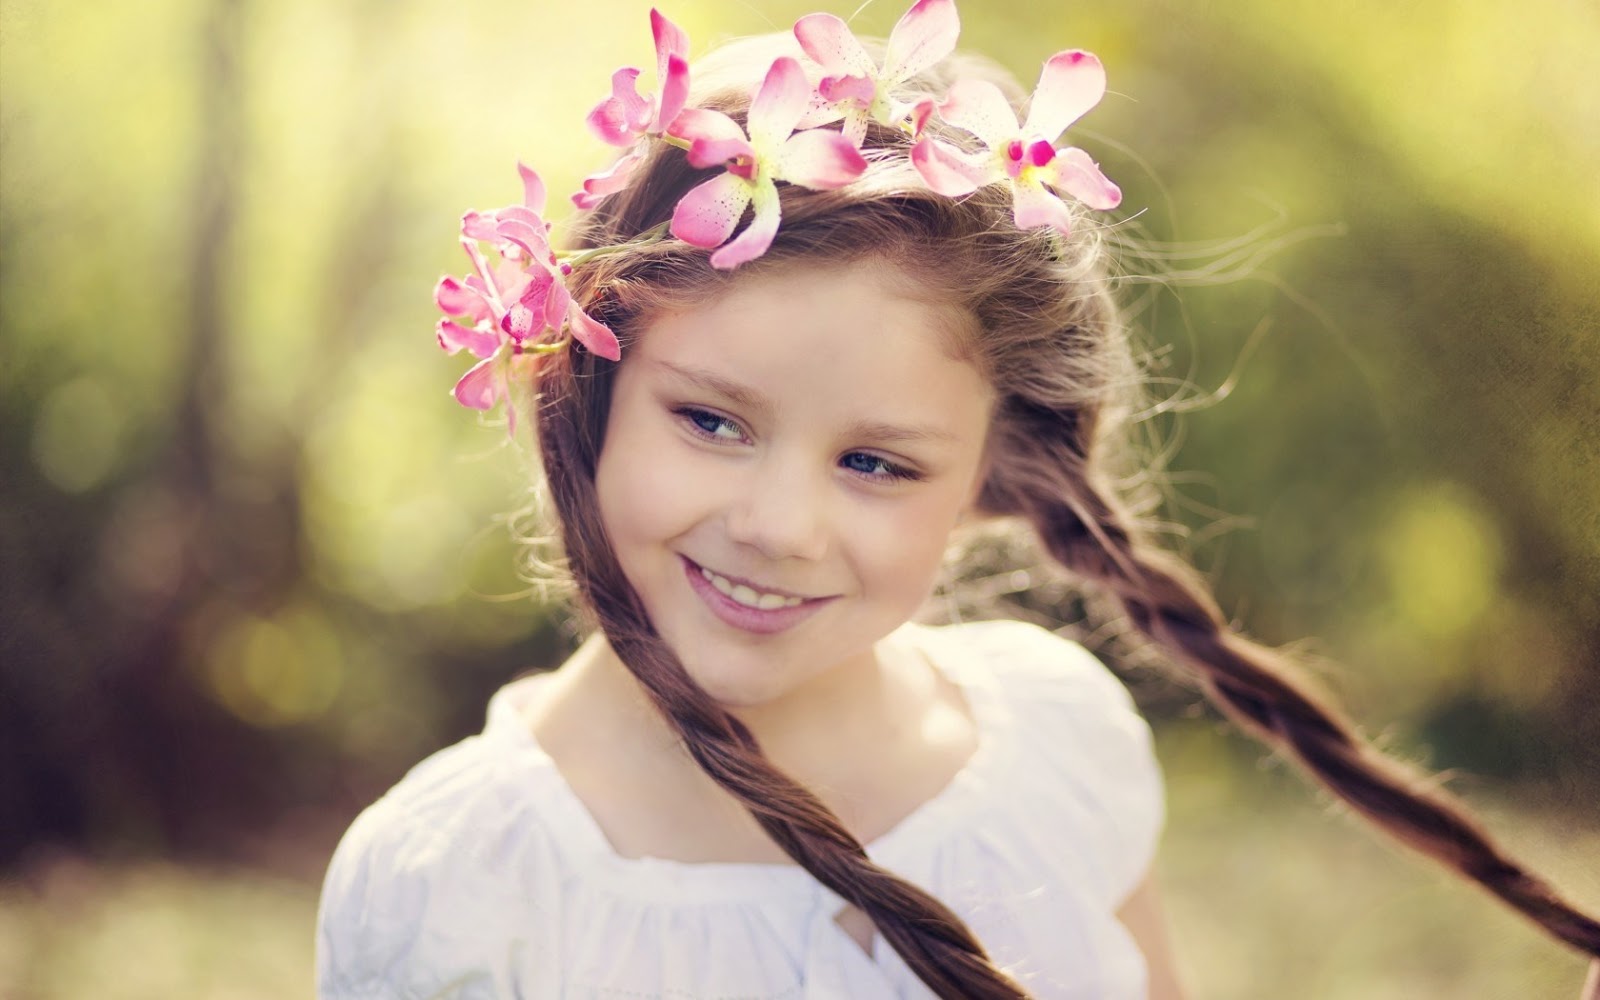 smile girl hd wallpaper,hair,hair accessory,headpiece,child,hairstyle